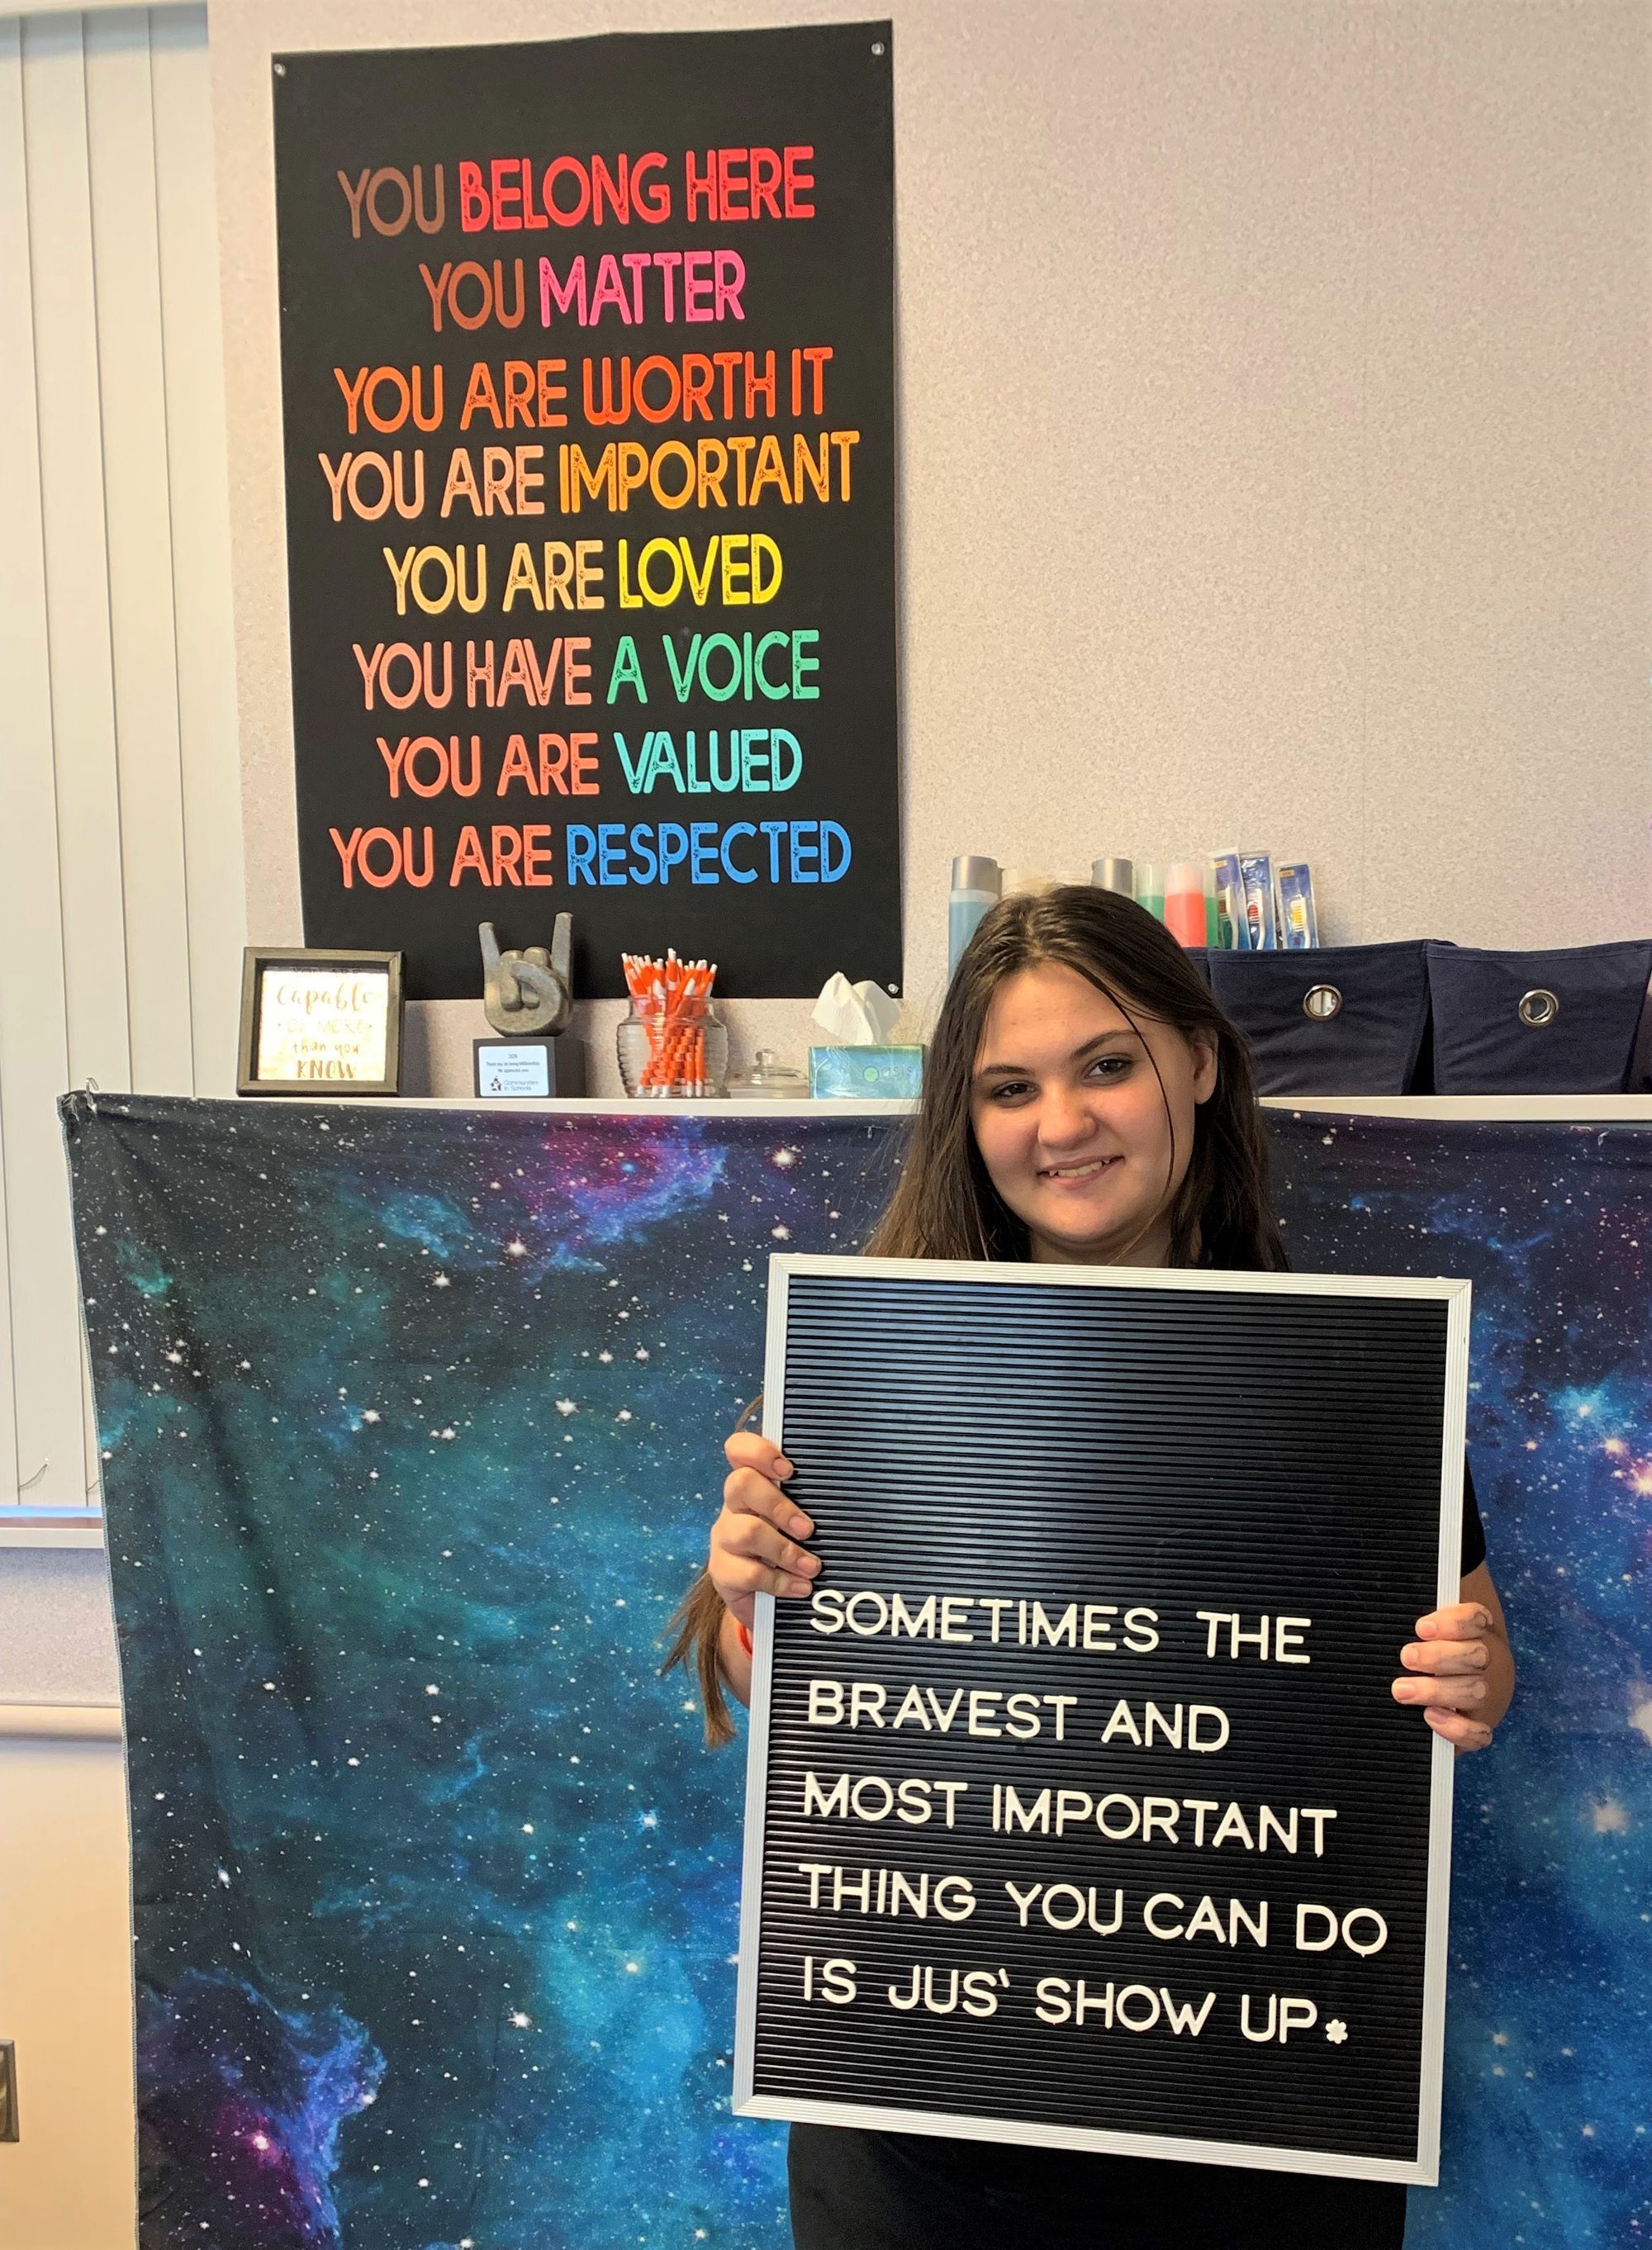 Poster reads: You belong here, you matter, you are worth it, you are important, you are loved, you have a voice, you are valued, you are respected . Student holds a sign that says: Sometimes the bravest and most important thing you can do is just show up.e.